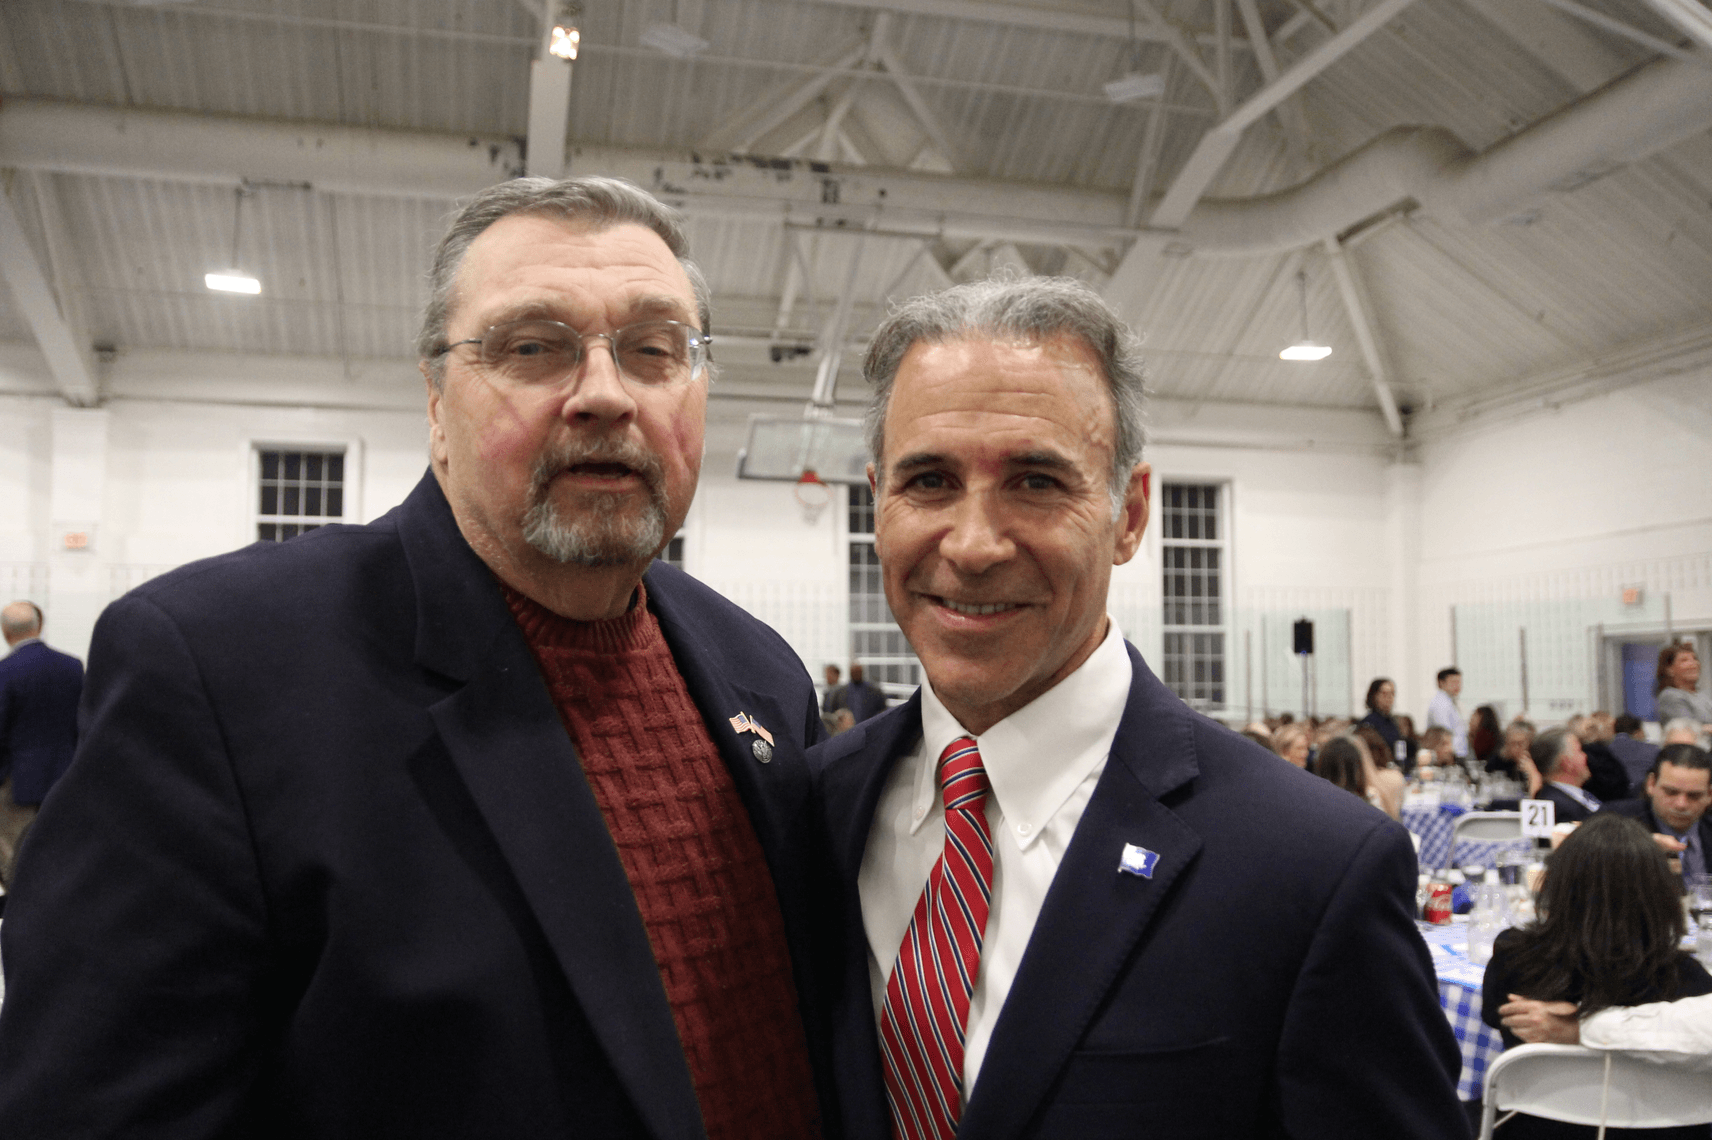 Joseph Havranek and Fred Camillo at the Youth of the Year event at the Boys & Girls Club of Greenwich. Feb. 7, 2019. Photo: Leslie Yager